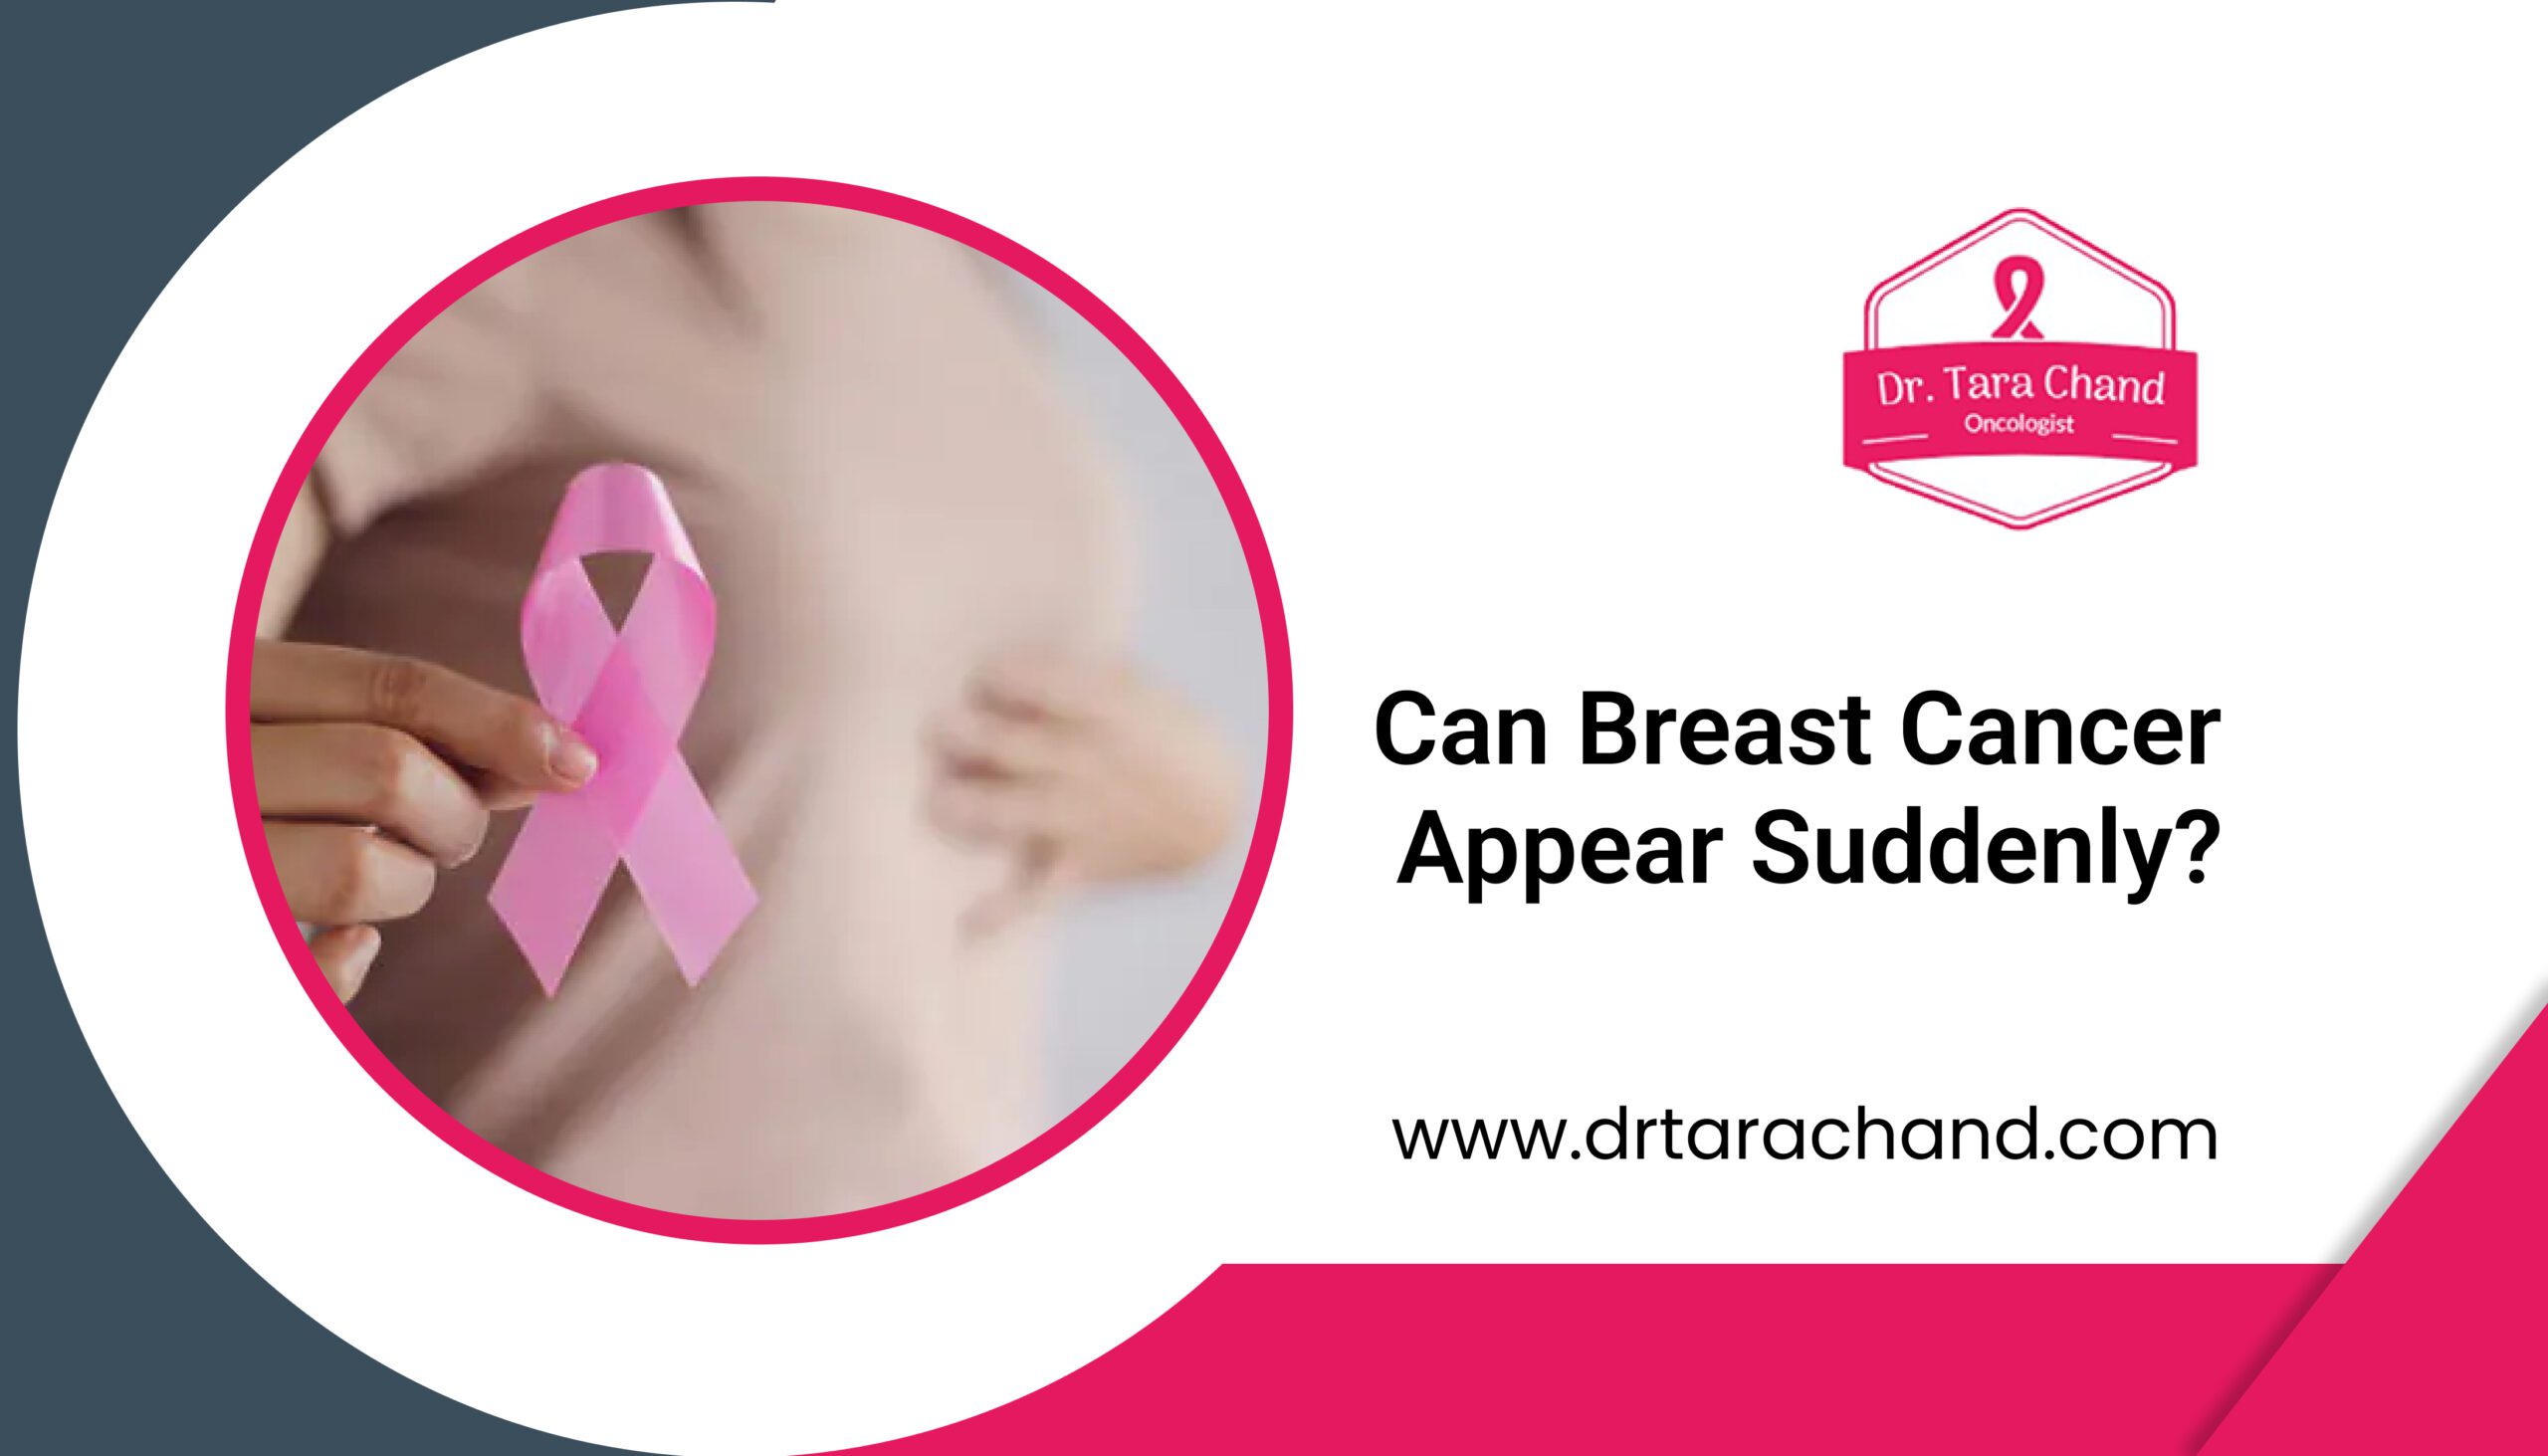 Can breast cancer appear suddenly?